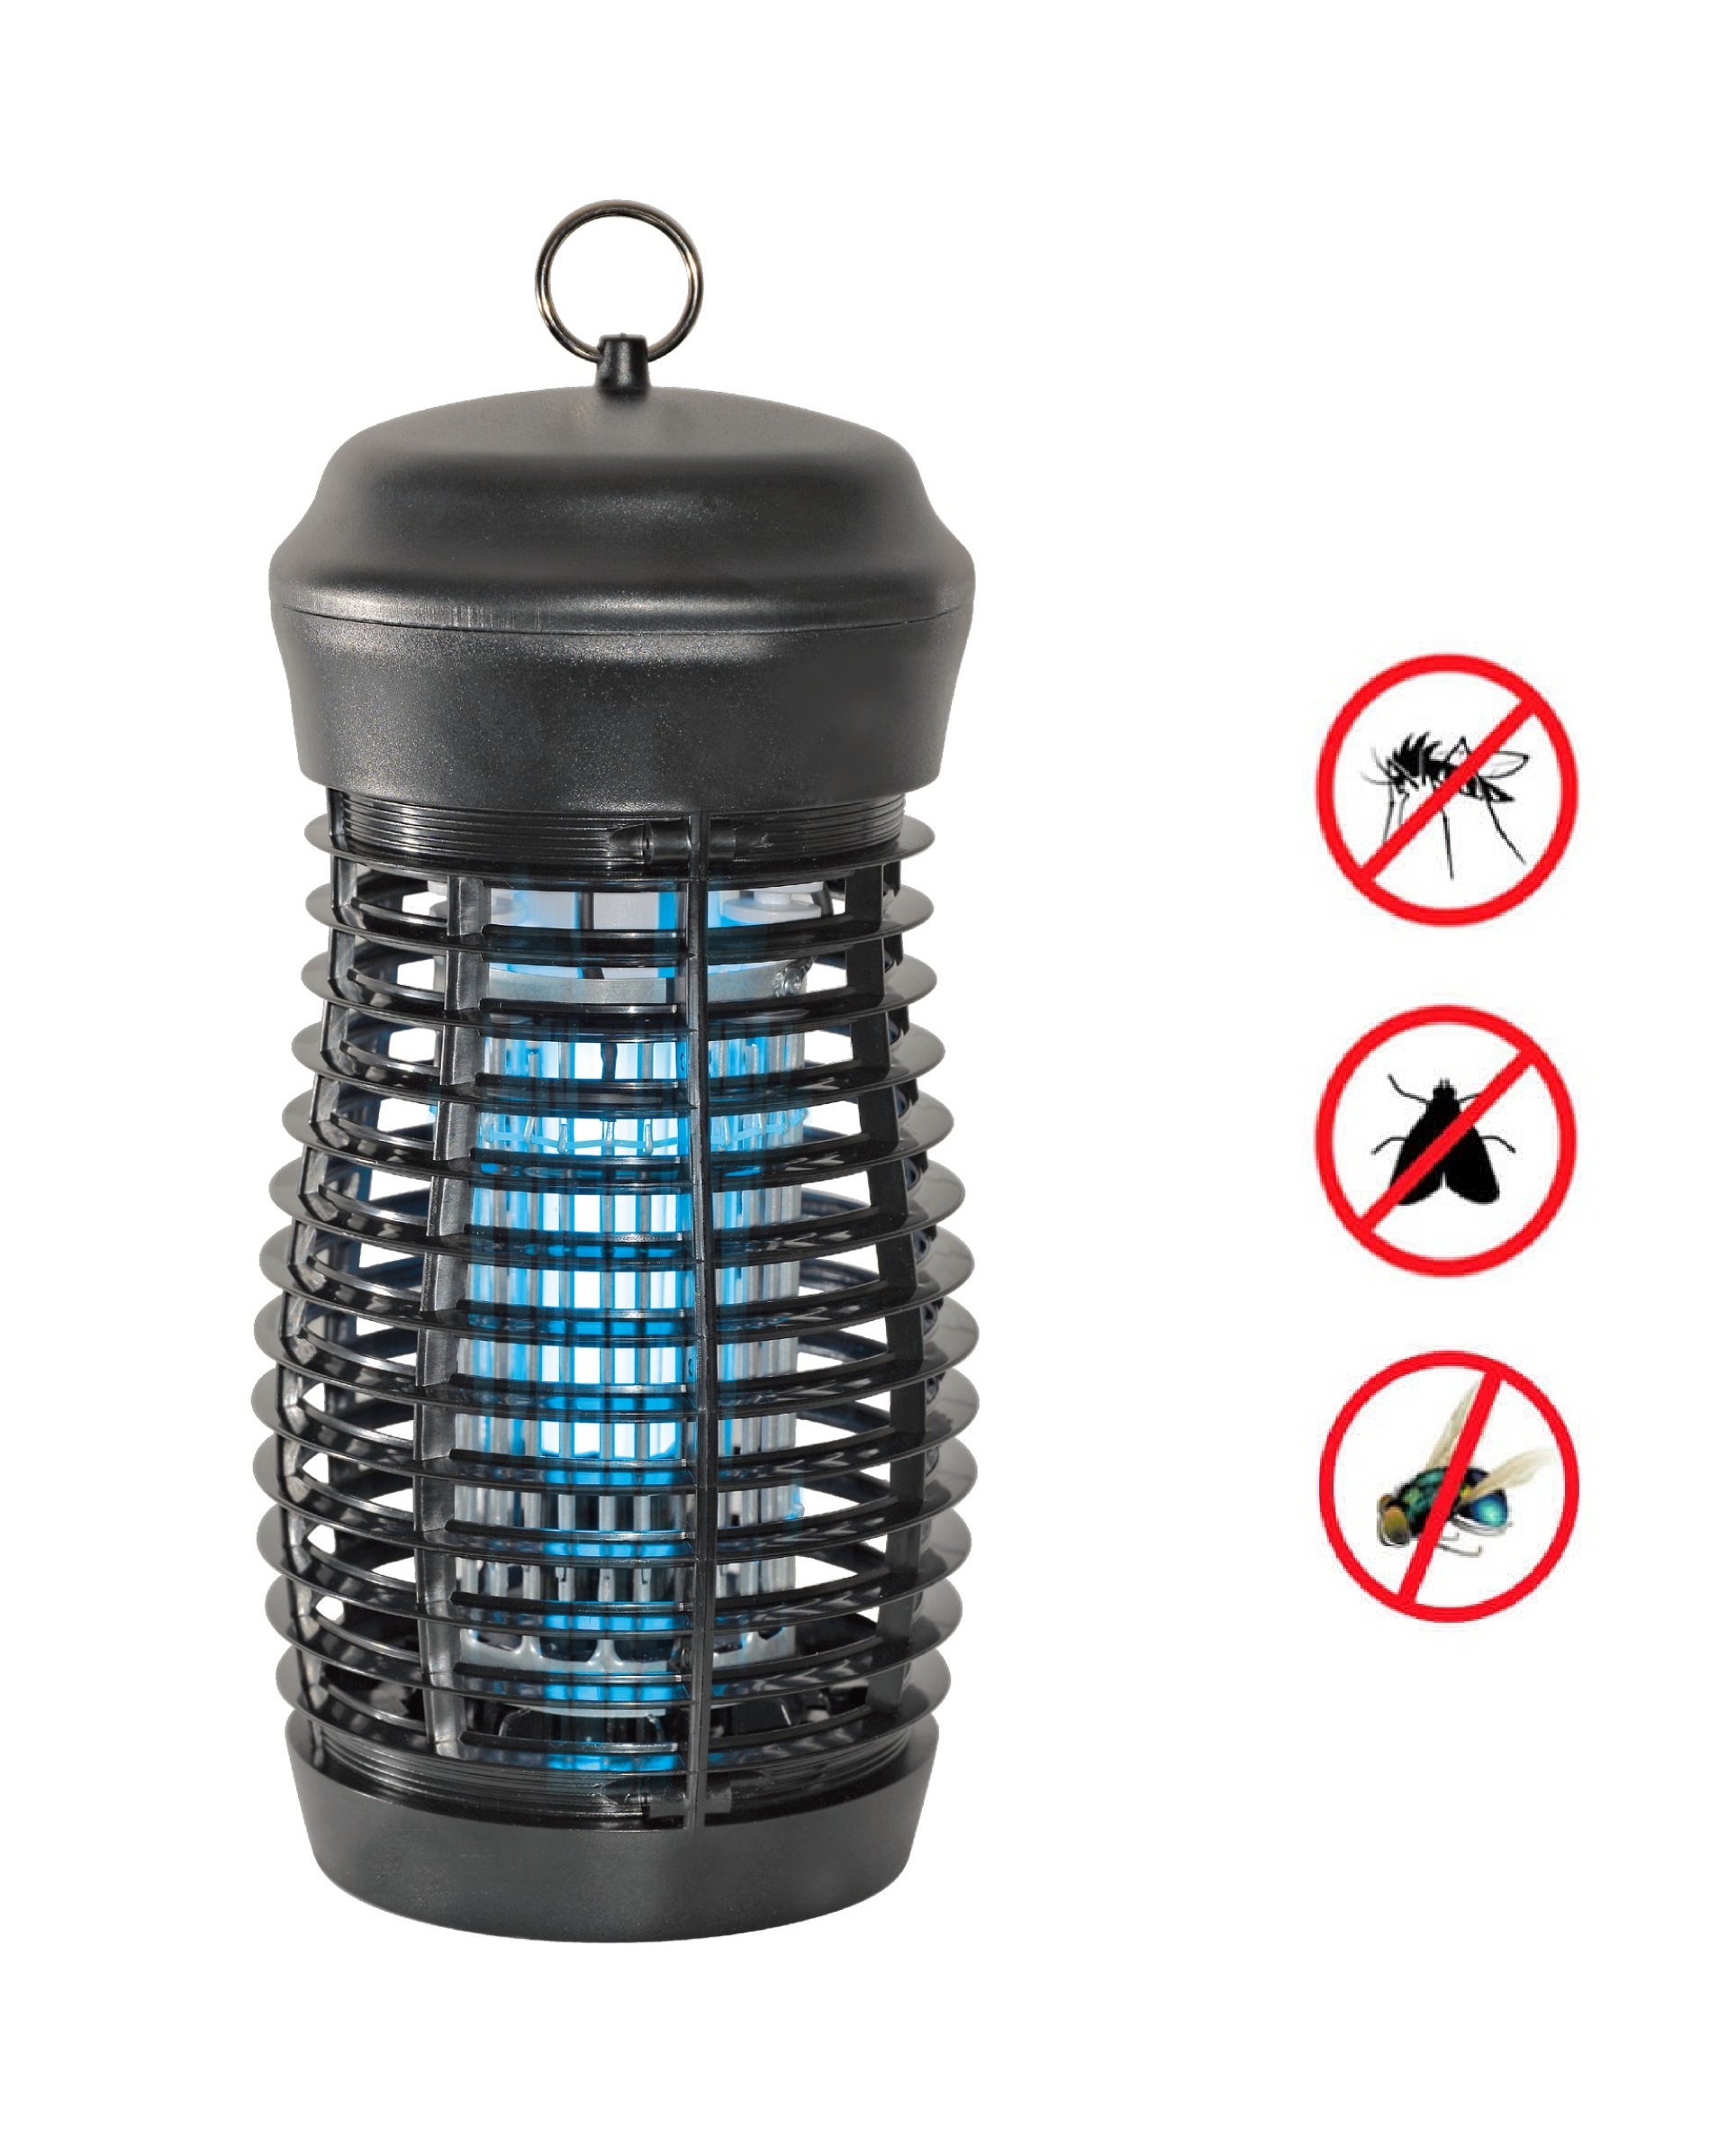 YT MK-023 Electronic LED Insect Killer, Bug Zapper, Mosquito